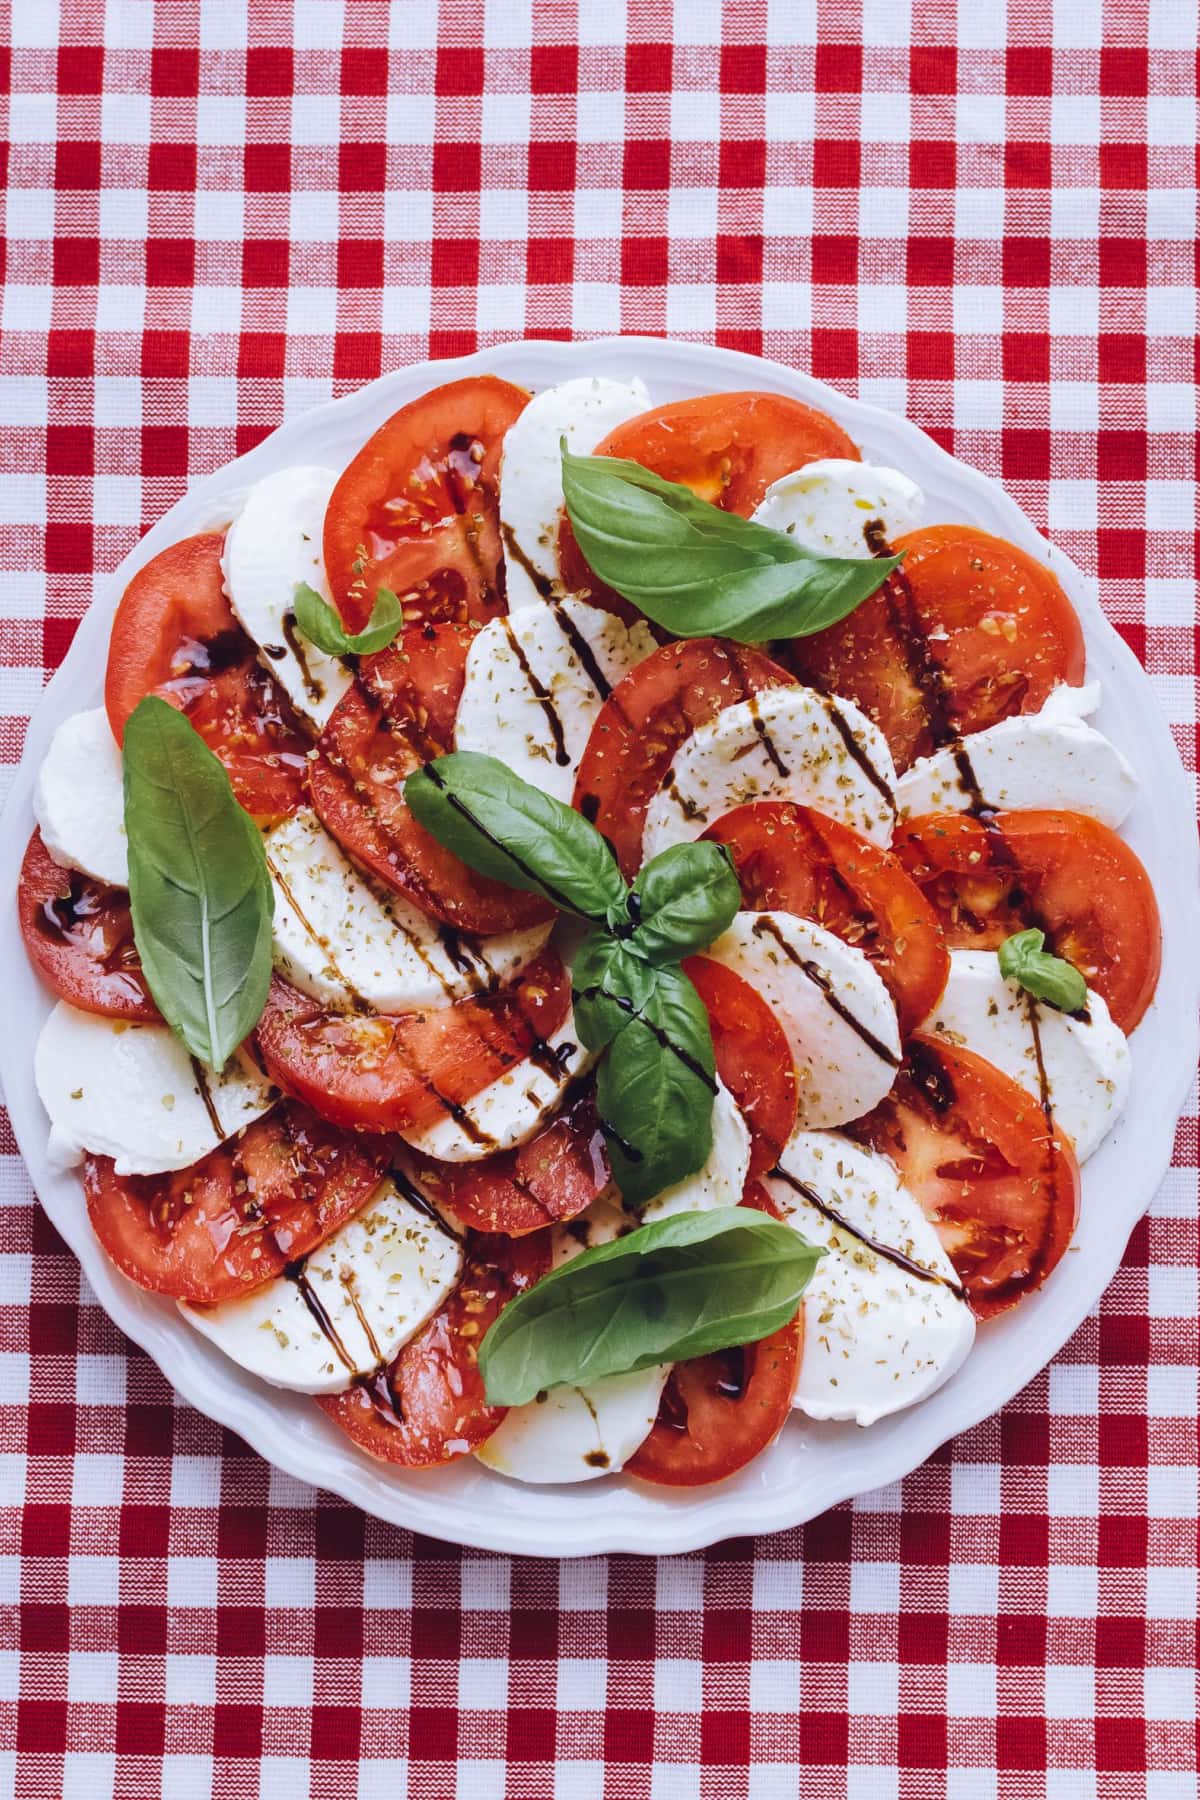 Top view of a platter of Caprese salad made with mozzarella cheese, basil leaves and tomatoes drizzled with balsamic vinegar and olive oil. 